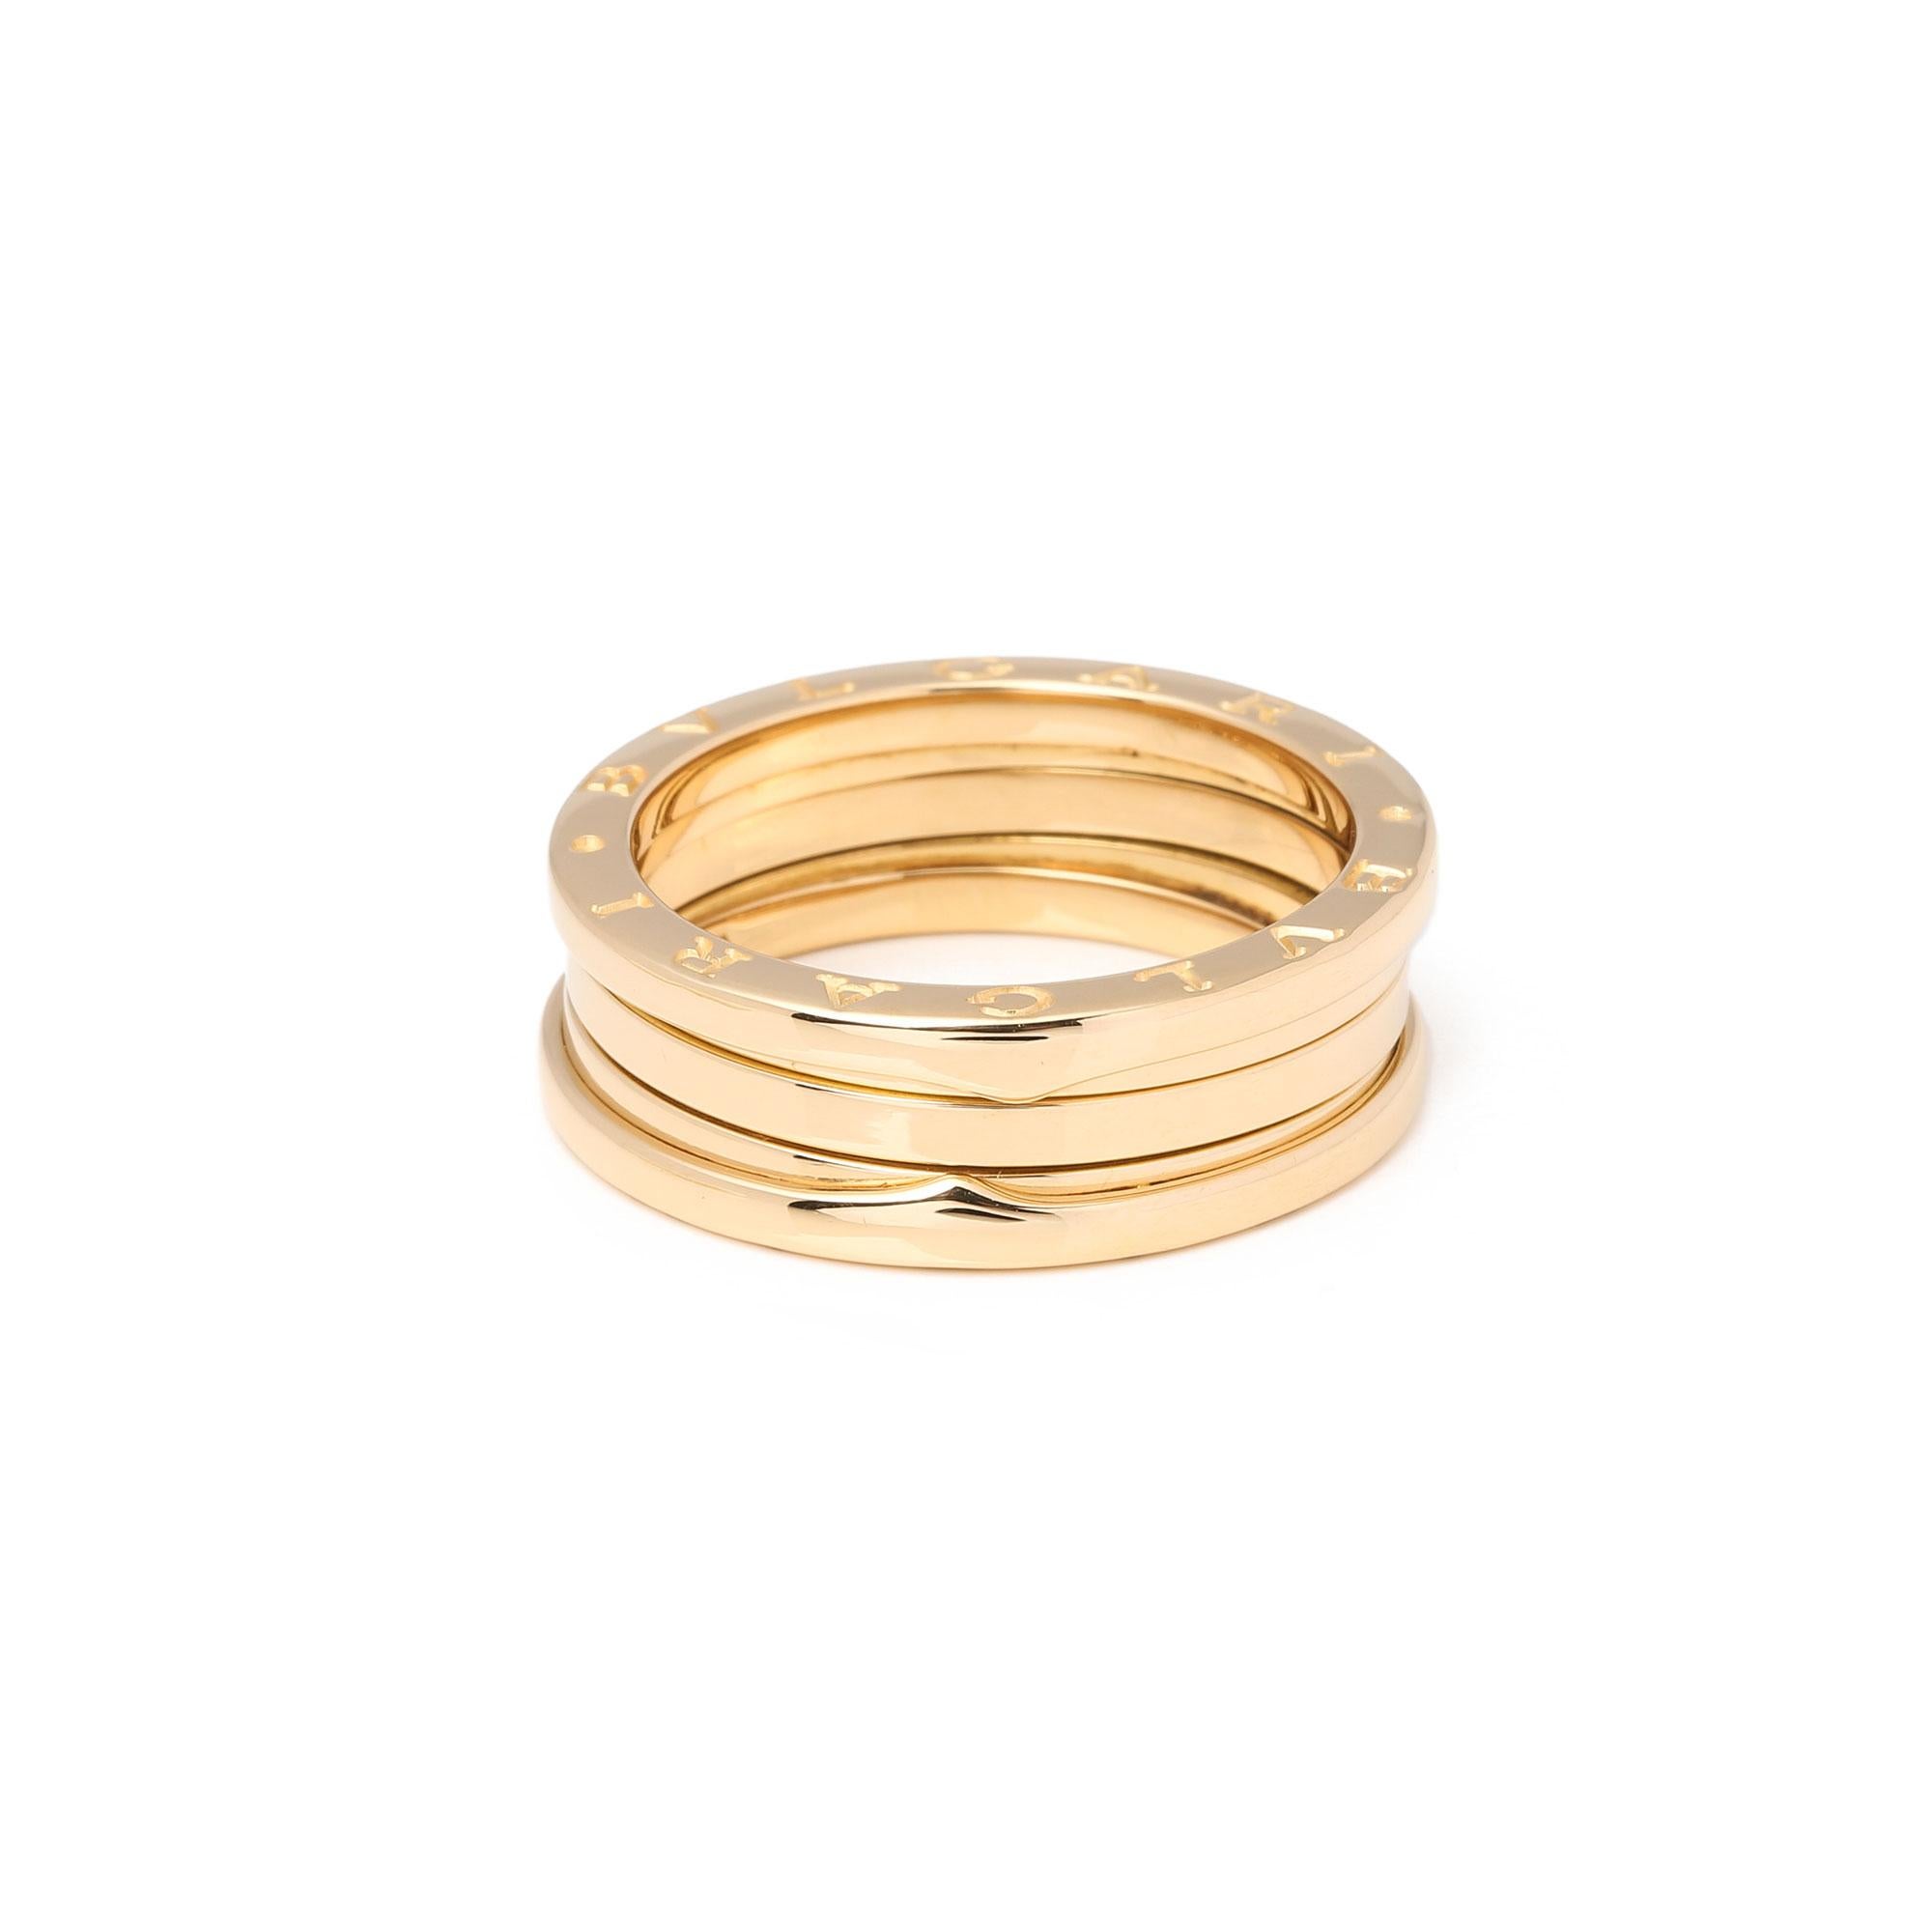 This ring by Bulgari is from their B Zero 1 collection and features three rows made in 18ct yellow gold. UK ring size T 1/2. EU ring size 62. US ring size 10 1/4. Complete with a Xupes presentation box. Our Xupes reference is COMJ519 should you need